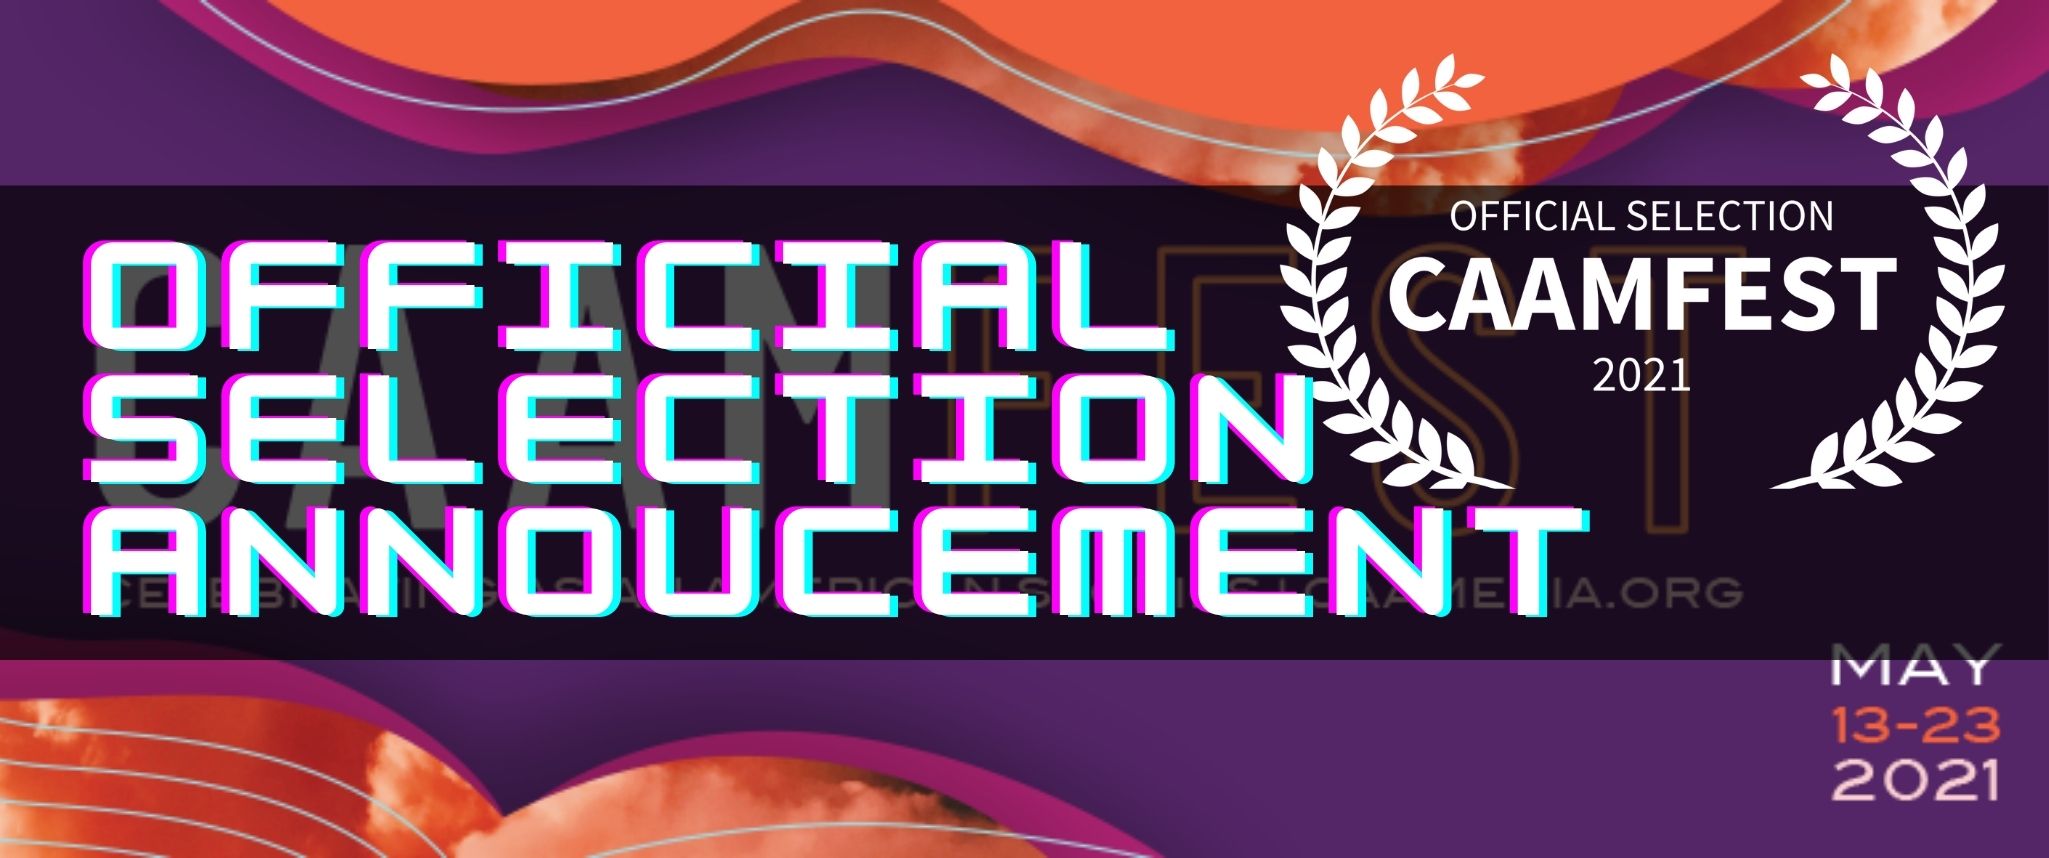 CAAMFest Official Selection